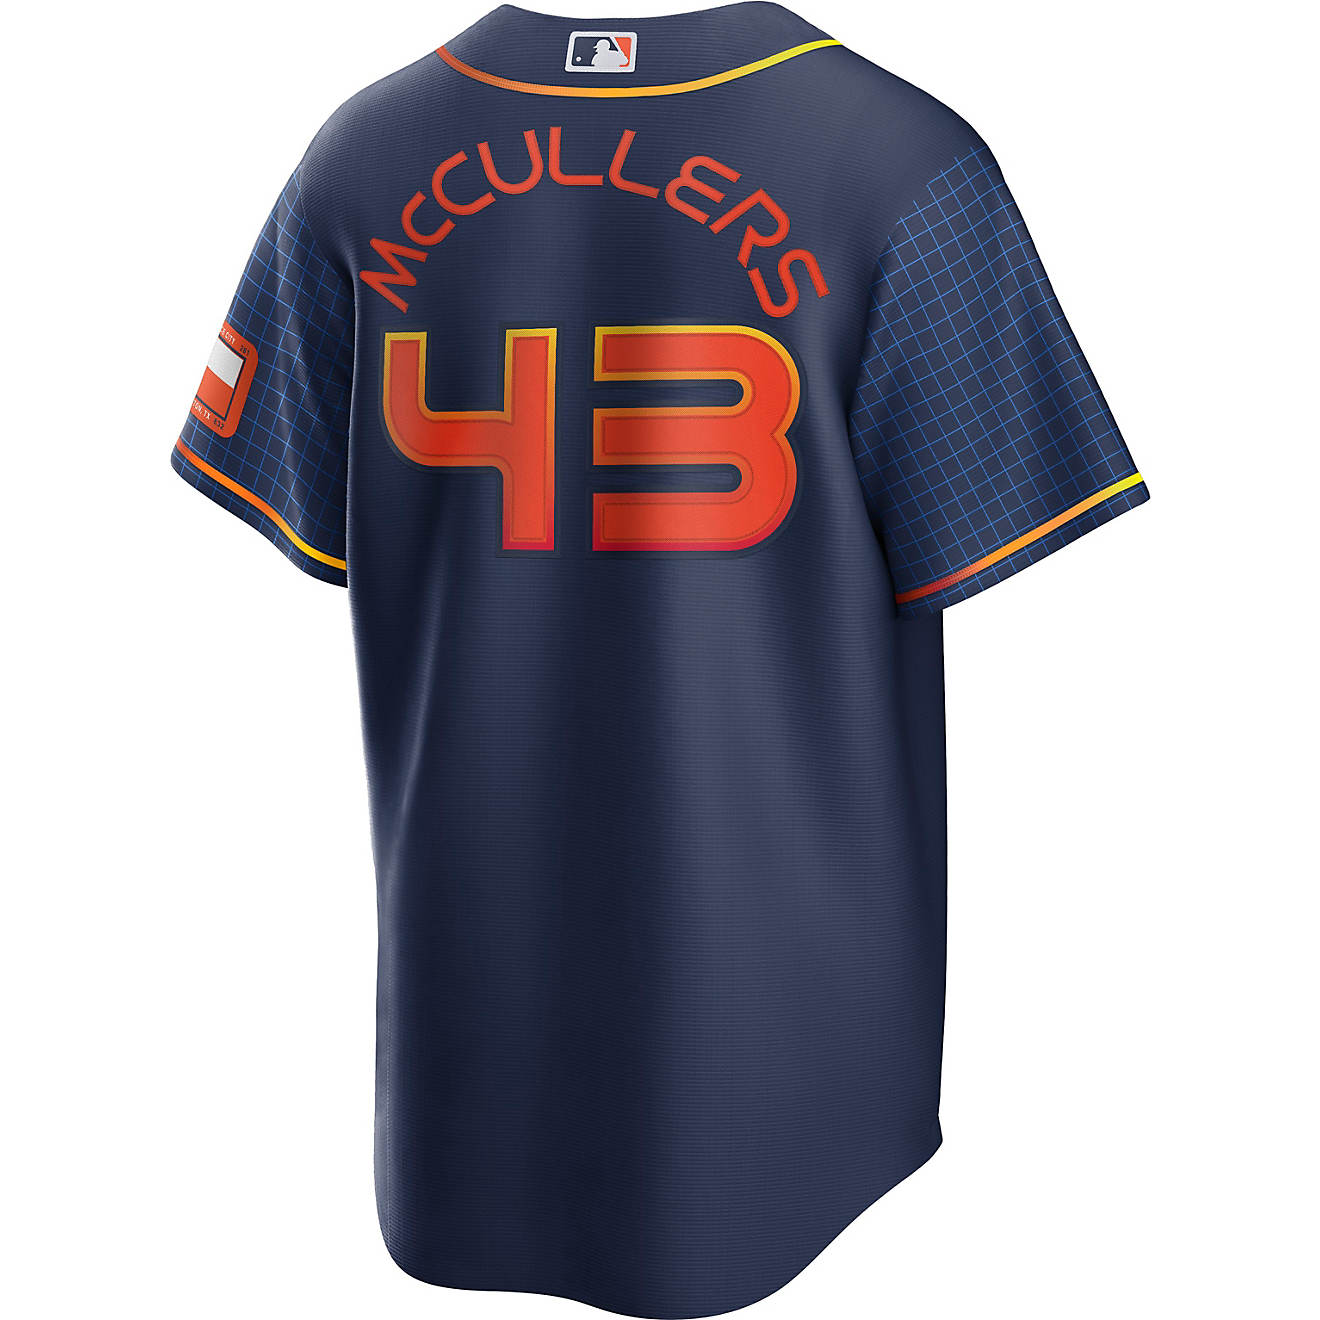 space city astros jersey